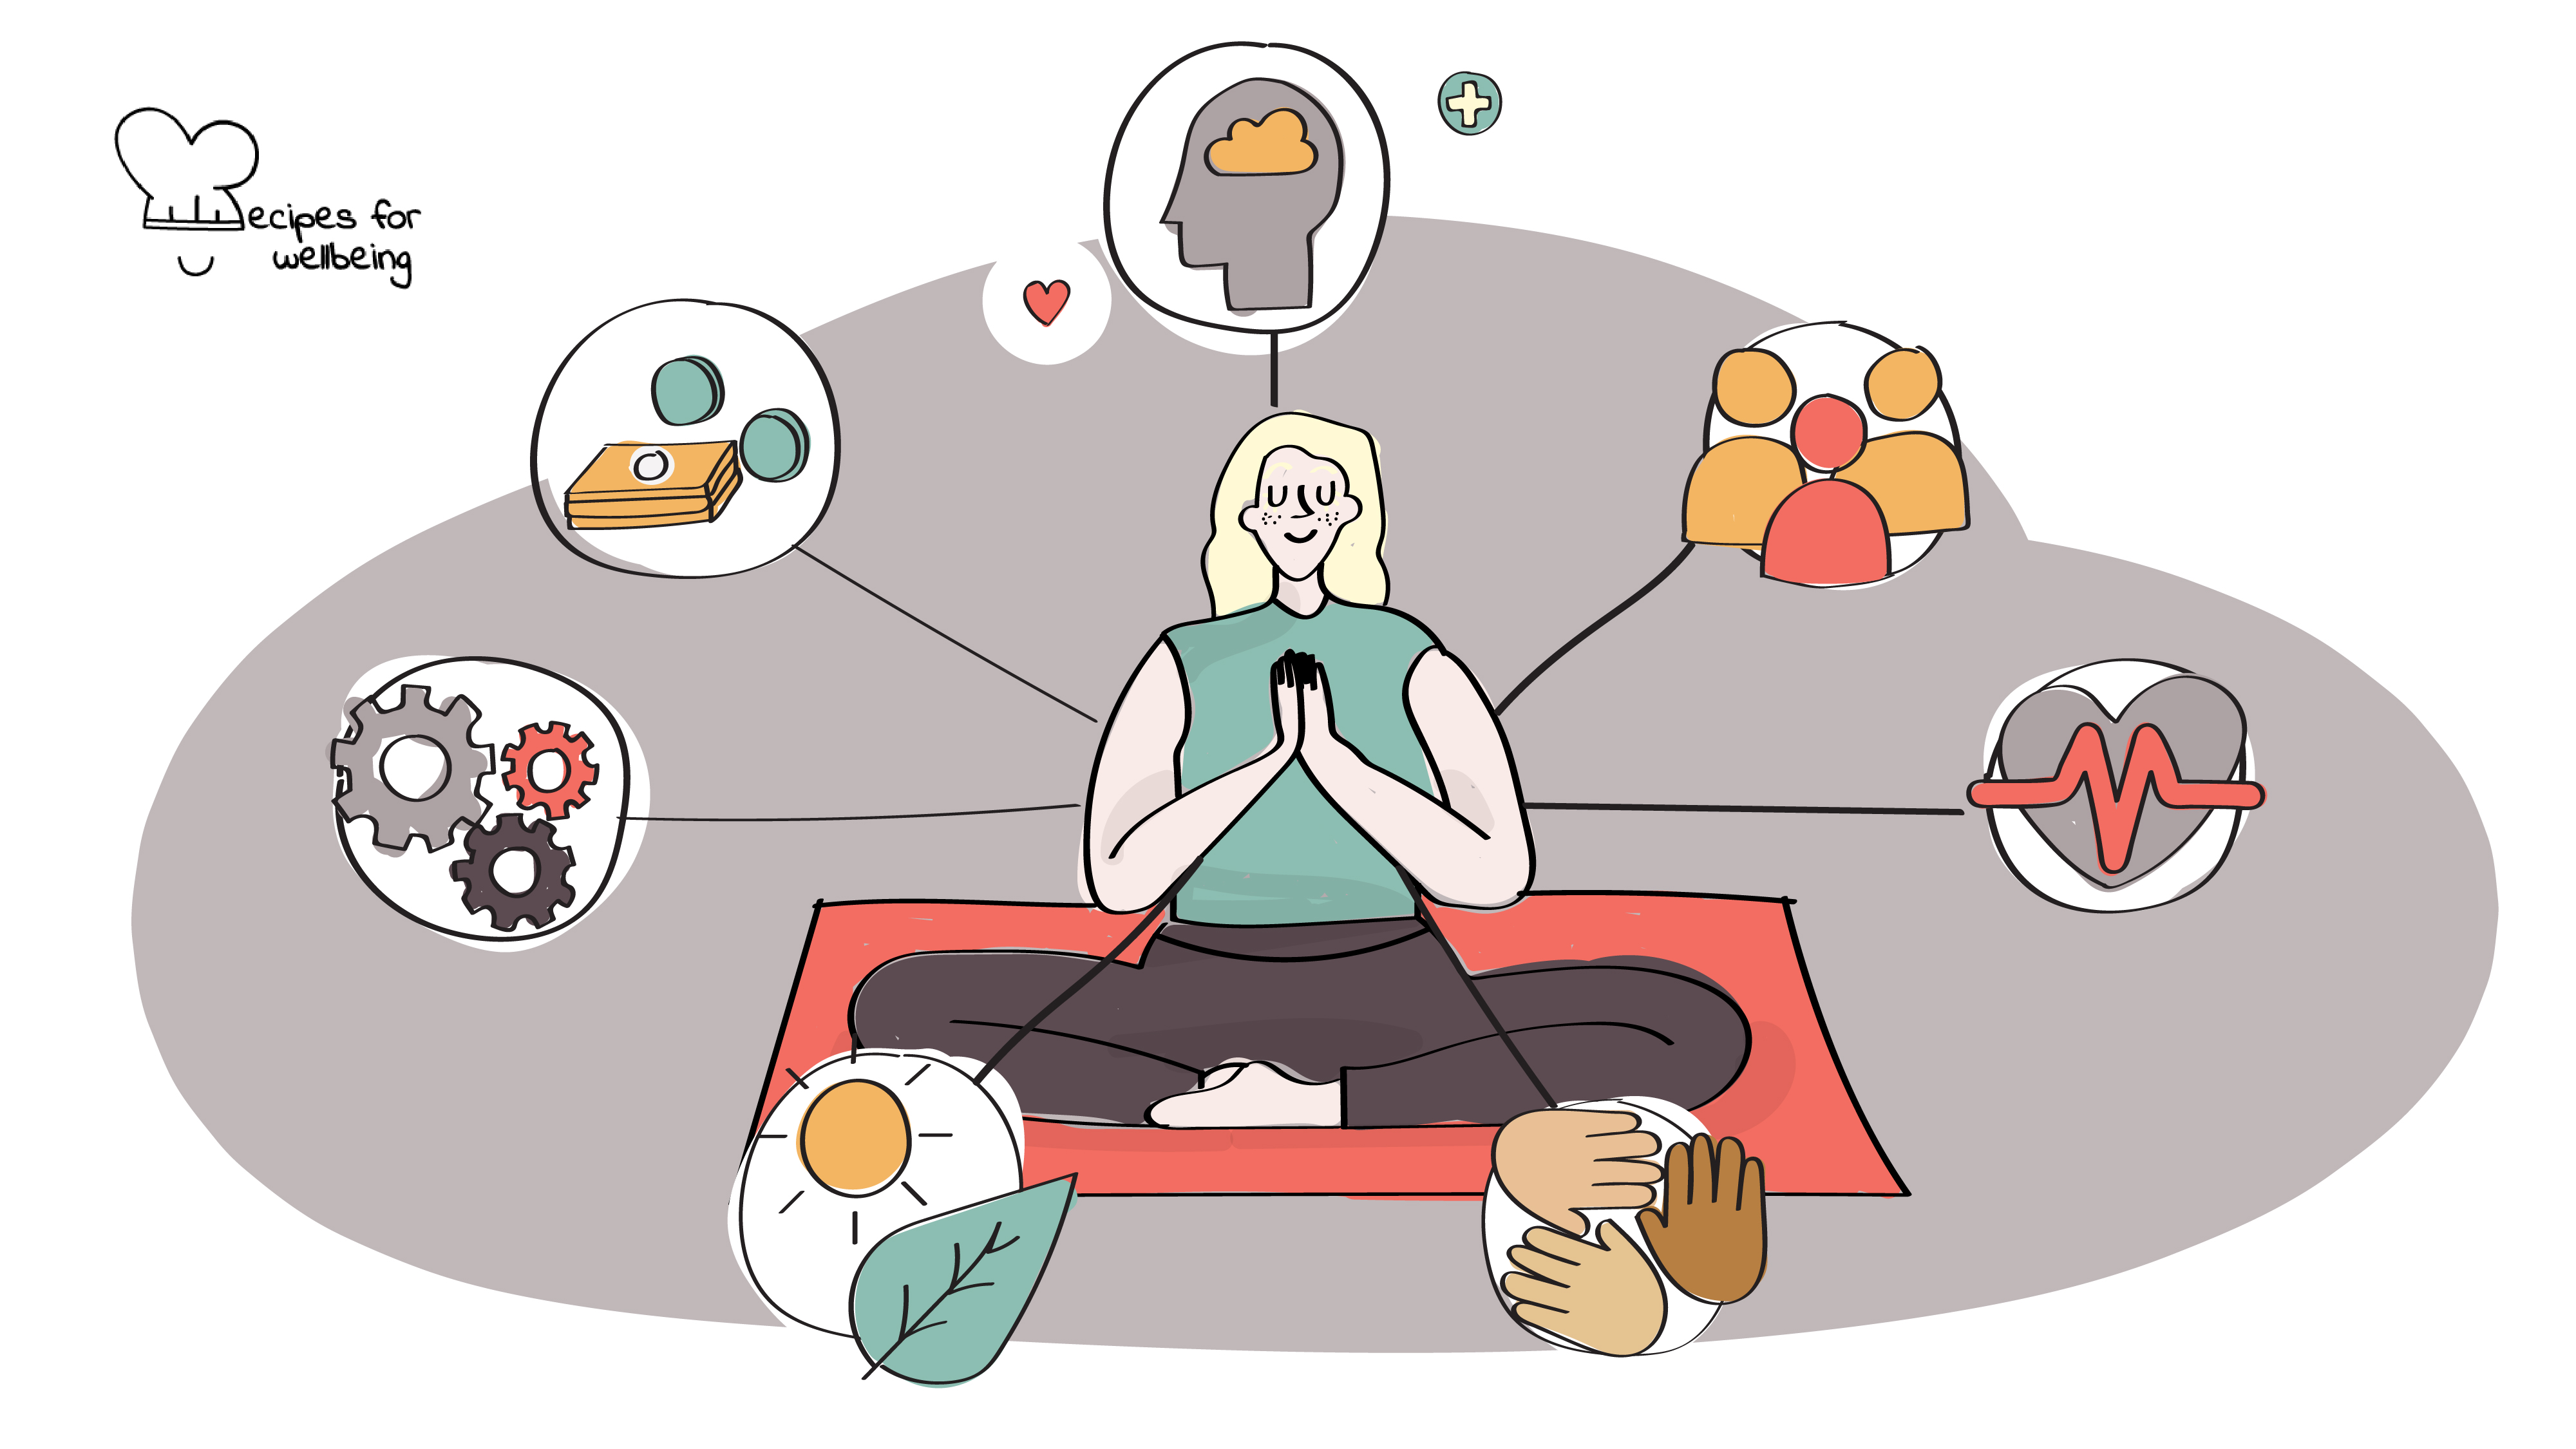 Illustration of a person sitting in a meditative pose and surrounded by different icons to represent different wellbeing dimensions. © Recipes for Wellbeing